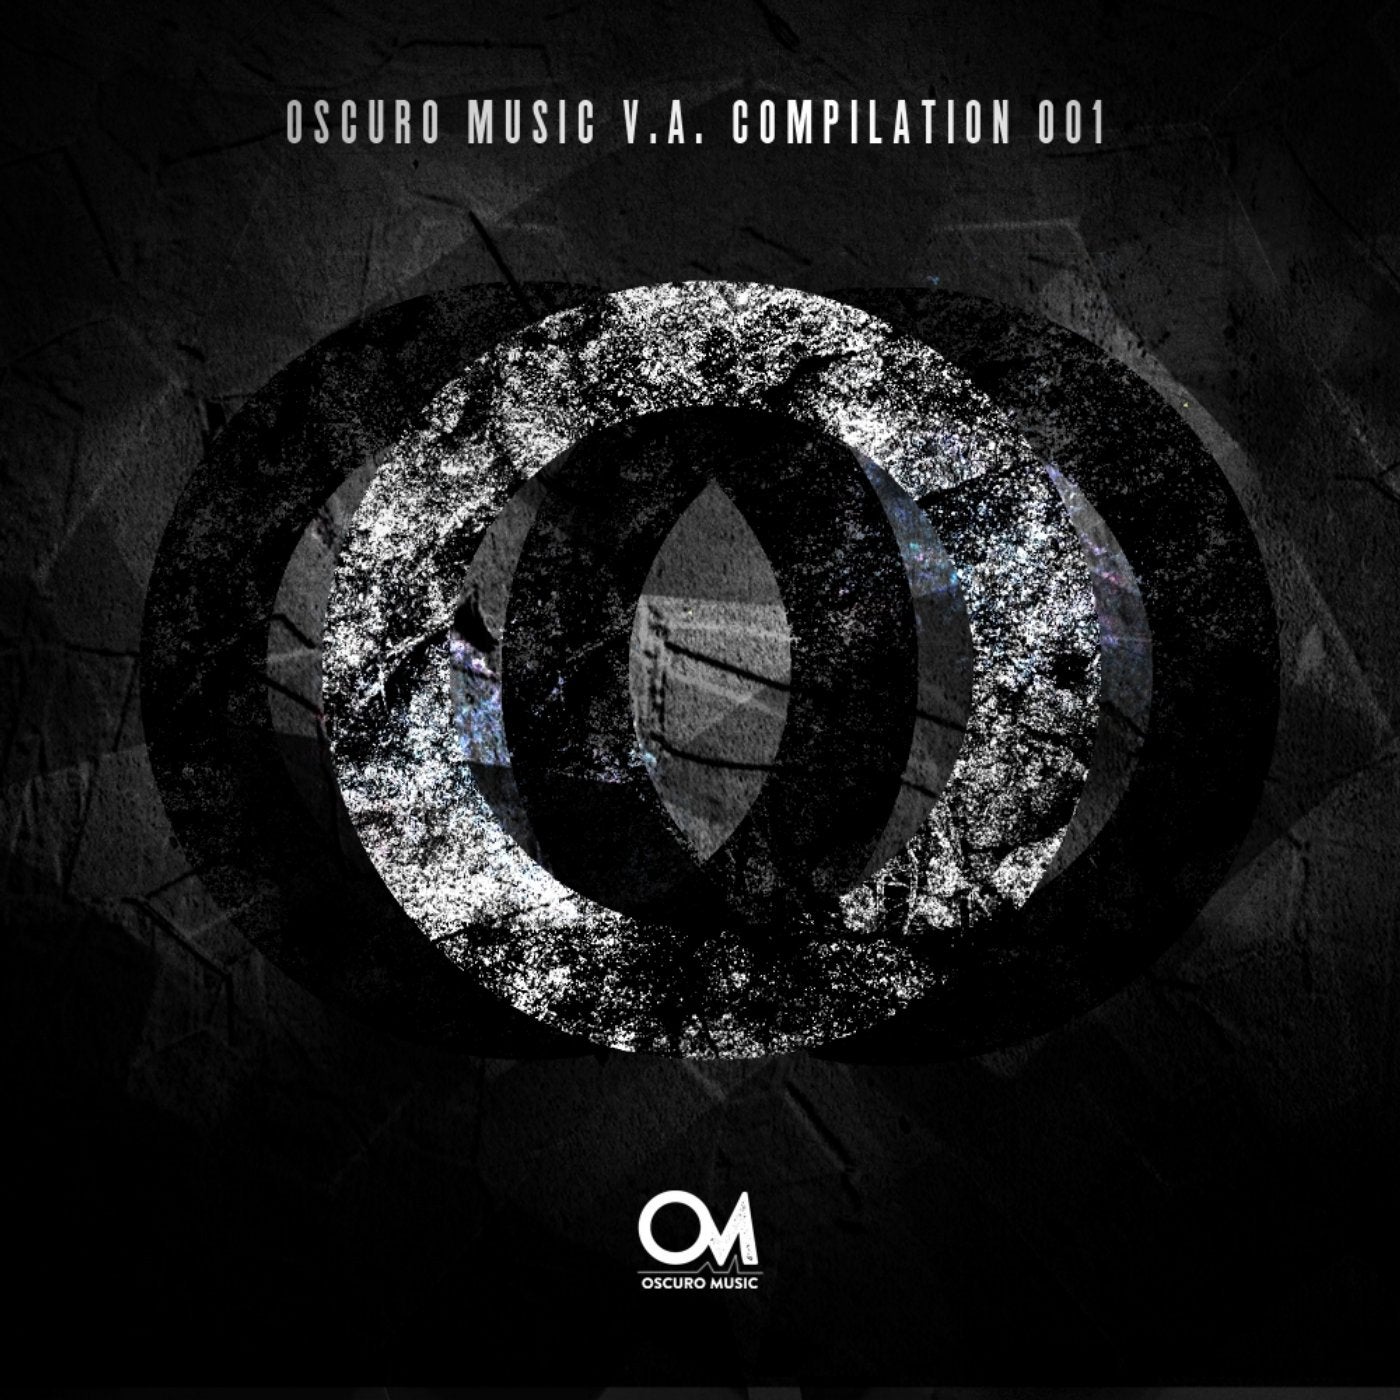 Oscuro Music V.A. Compilation 001